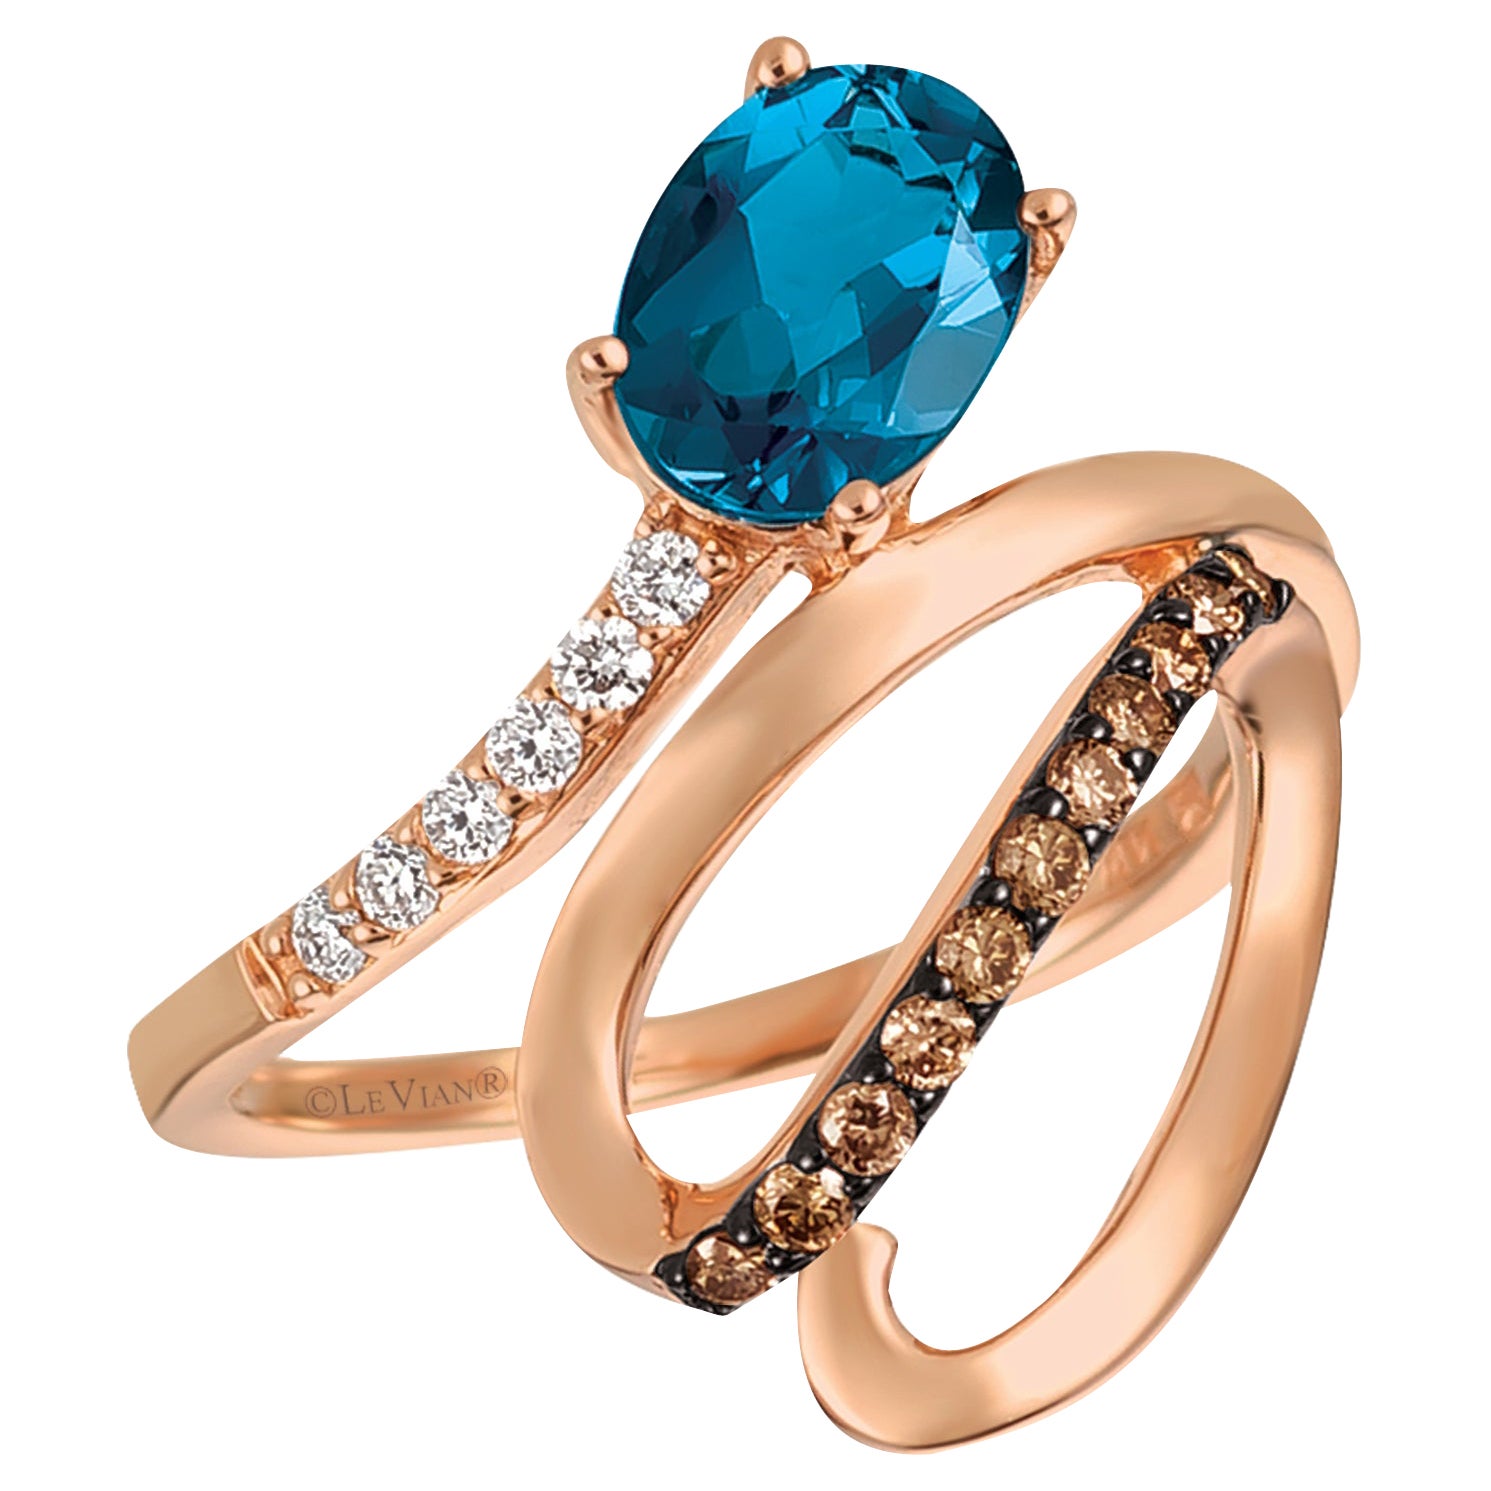 LeVian 4.87tcw Deep Sea Blue Topaz and Diamonds Ring 14k Gold For Sale ...